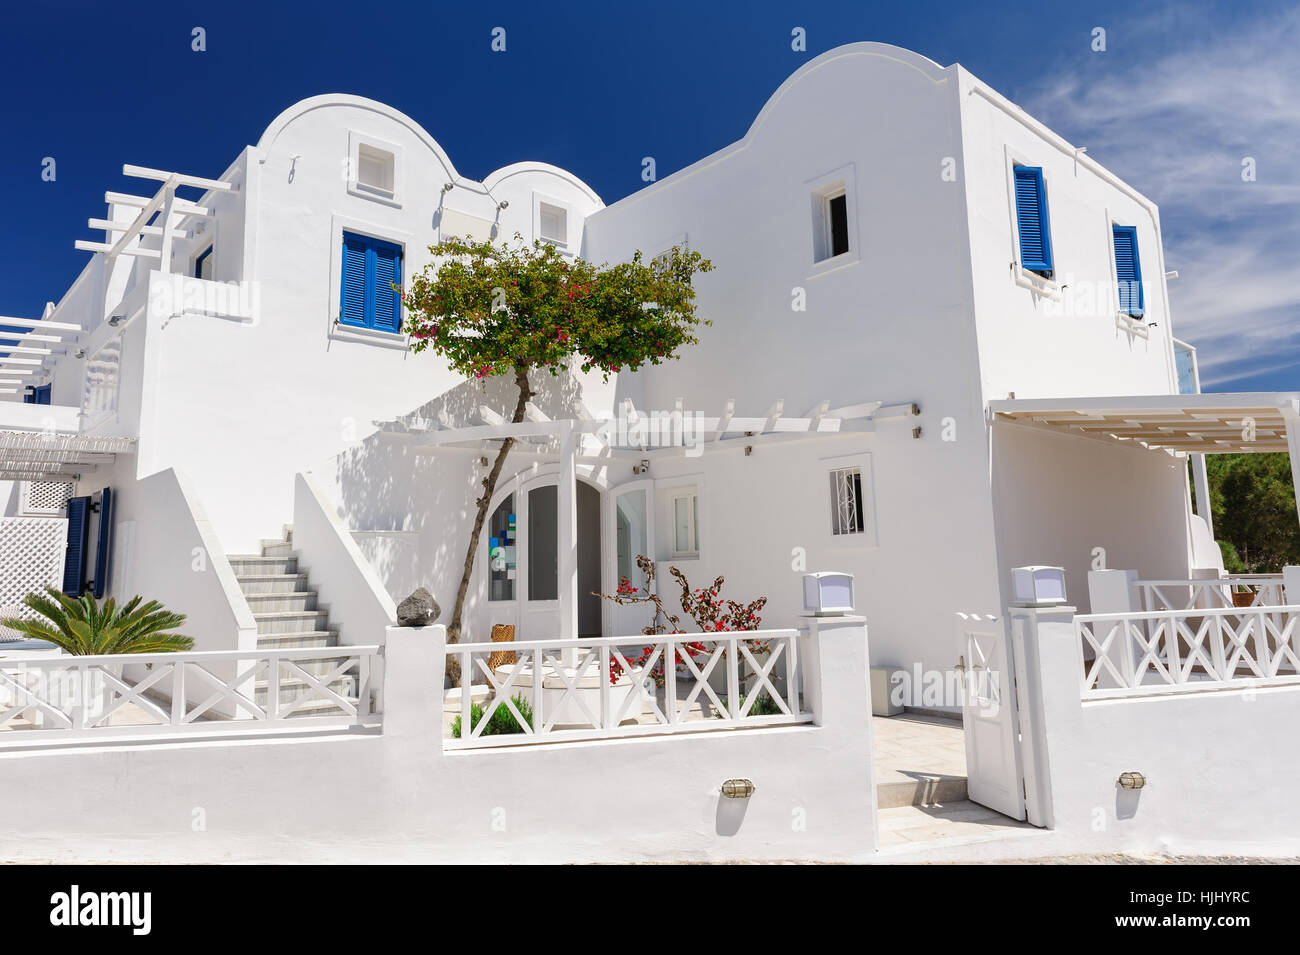 Oia typical luxury pension and patios Stock Photo